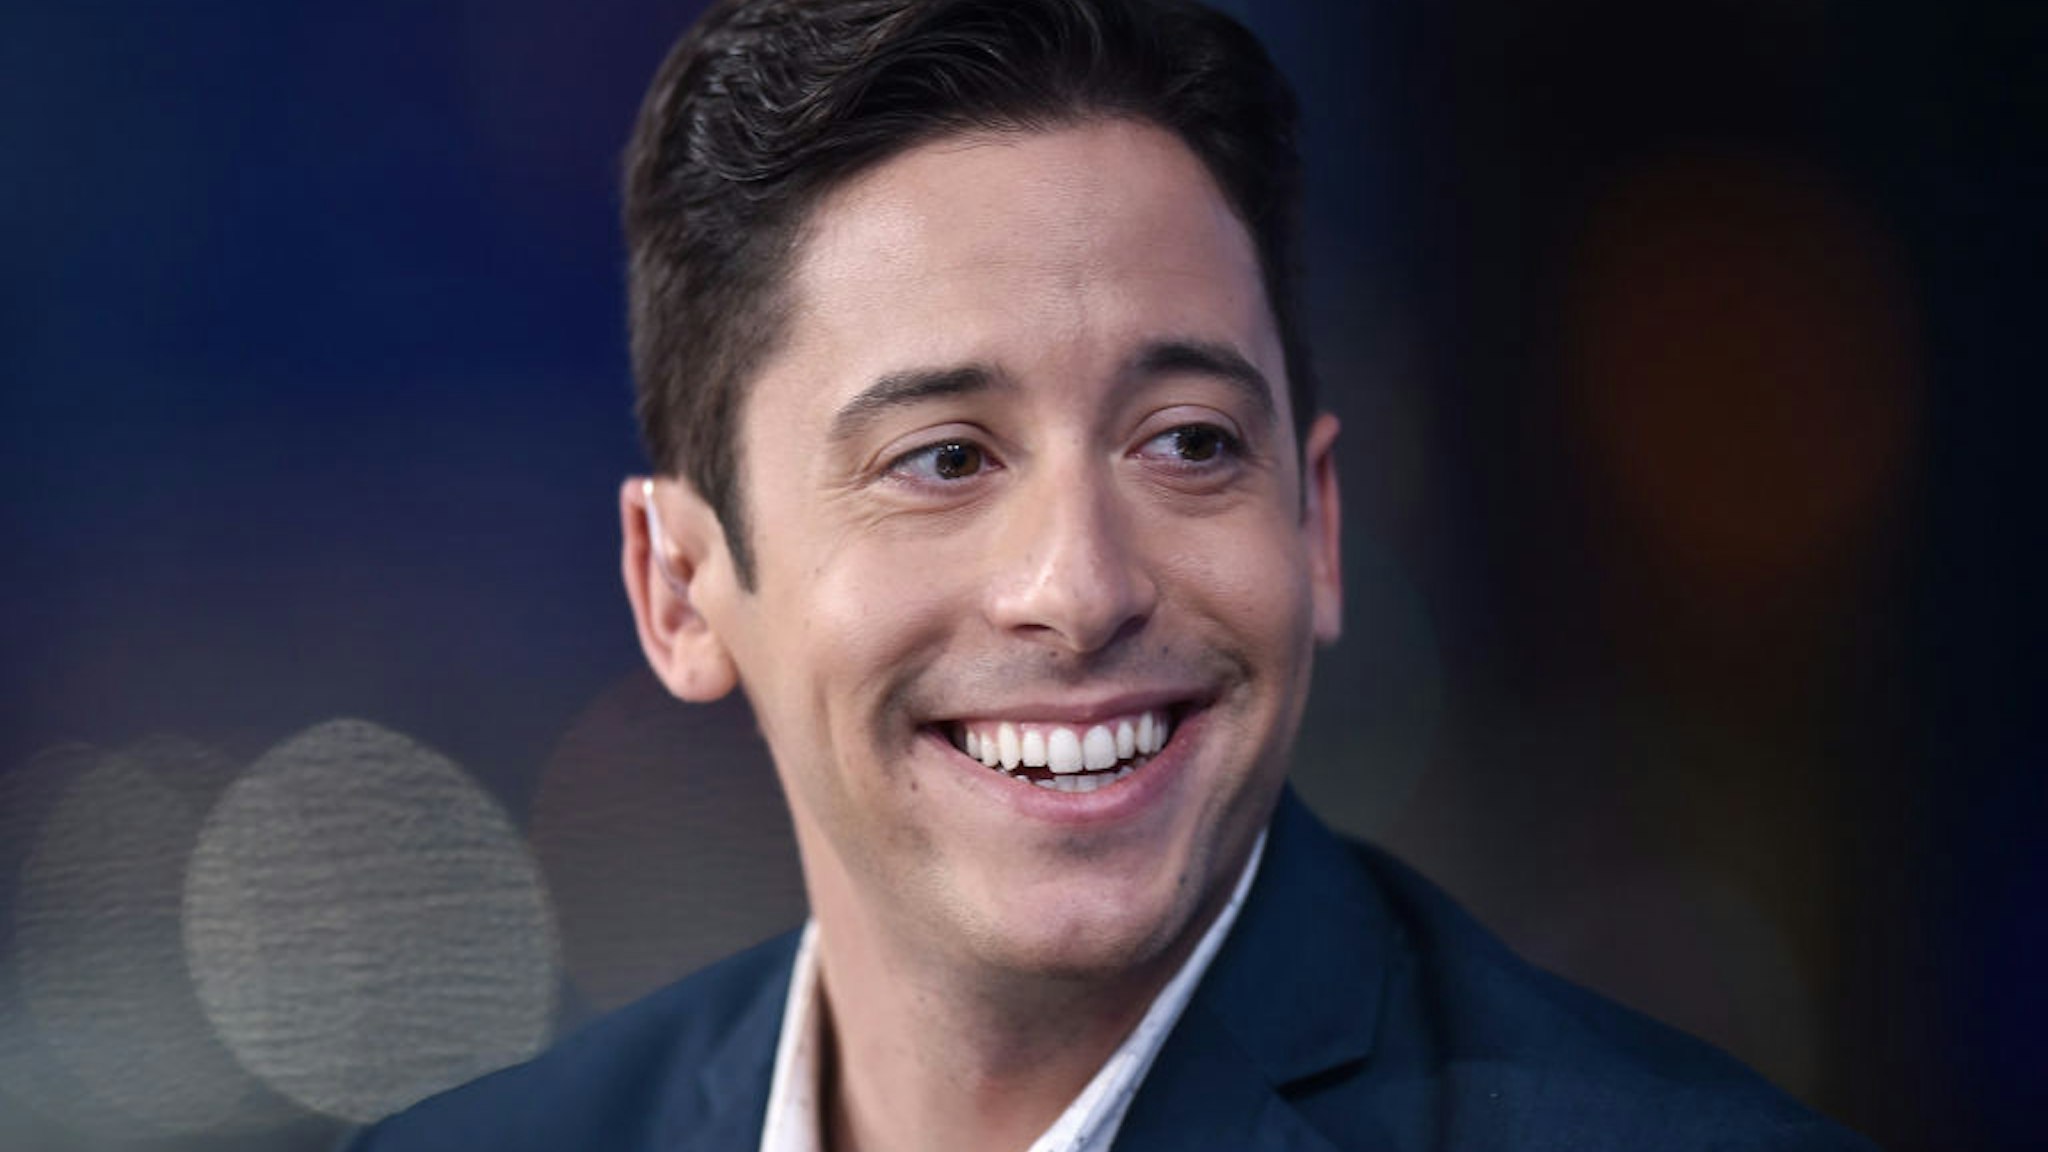 NEW YORK, NEW YORK - SEPTEMBER 17: (EXCLUSIVE COVERAGE) Michael Knowles visits "The Story with Martha MacCallum" in the Fox News Channel Studios on September 17, 2019 in New York City. (Photo by Steven Ferdman/Getty Images)